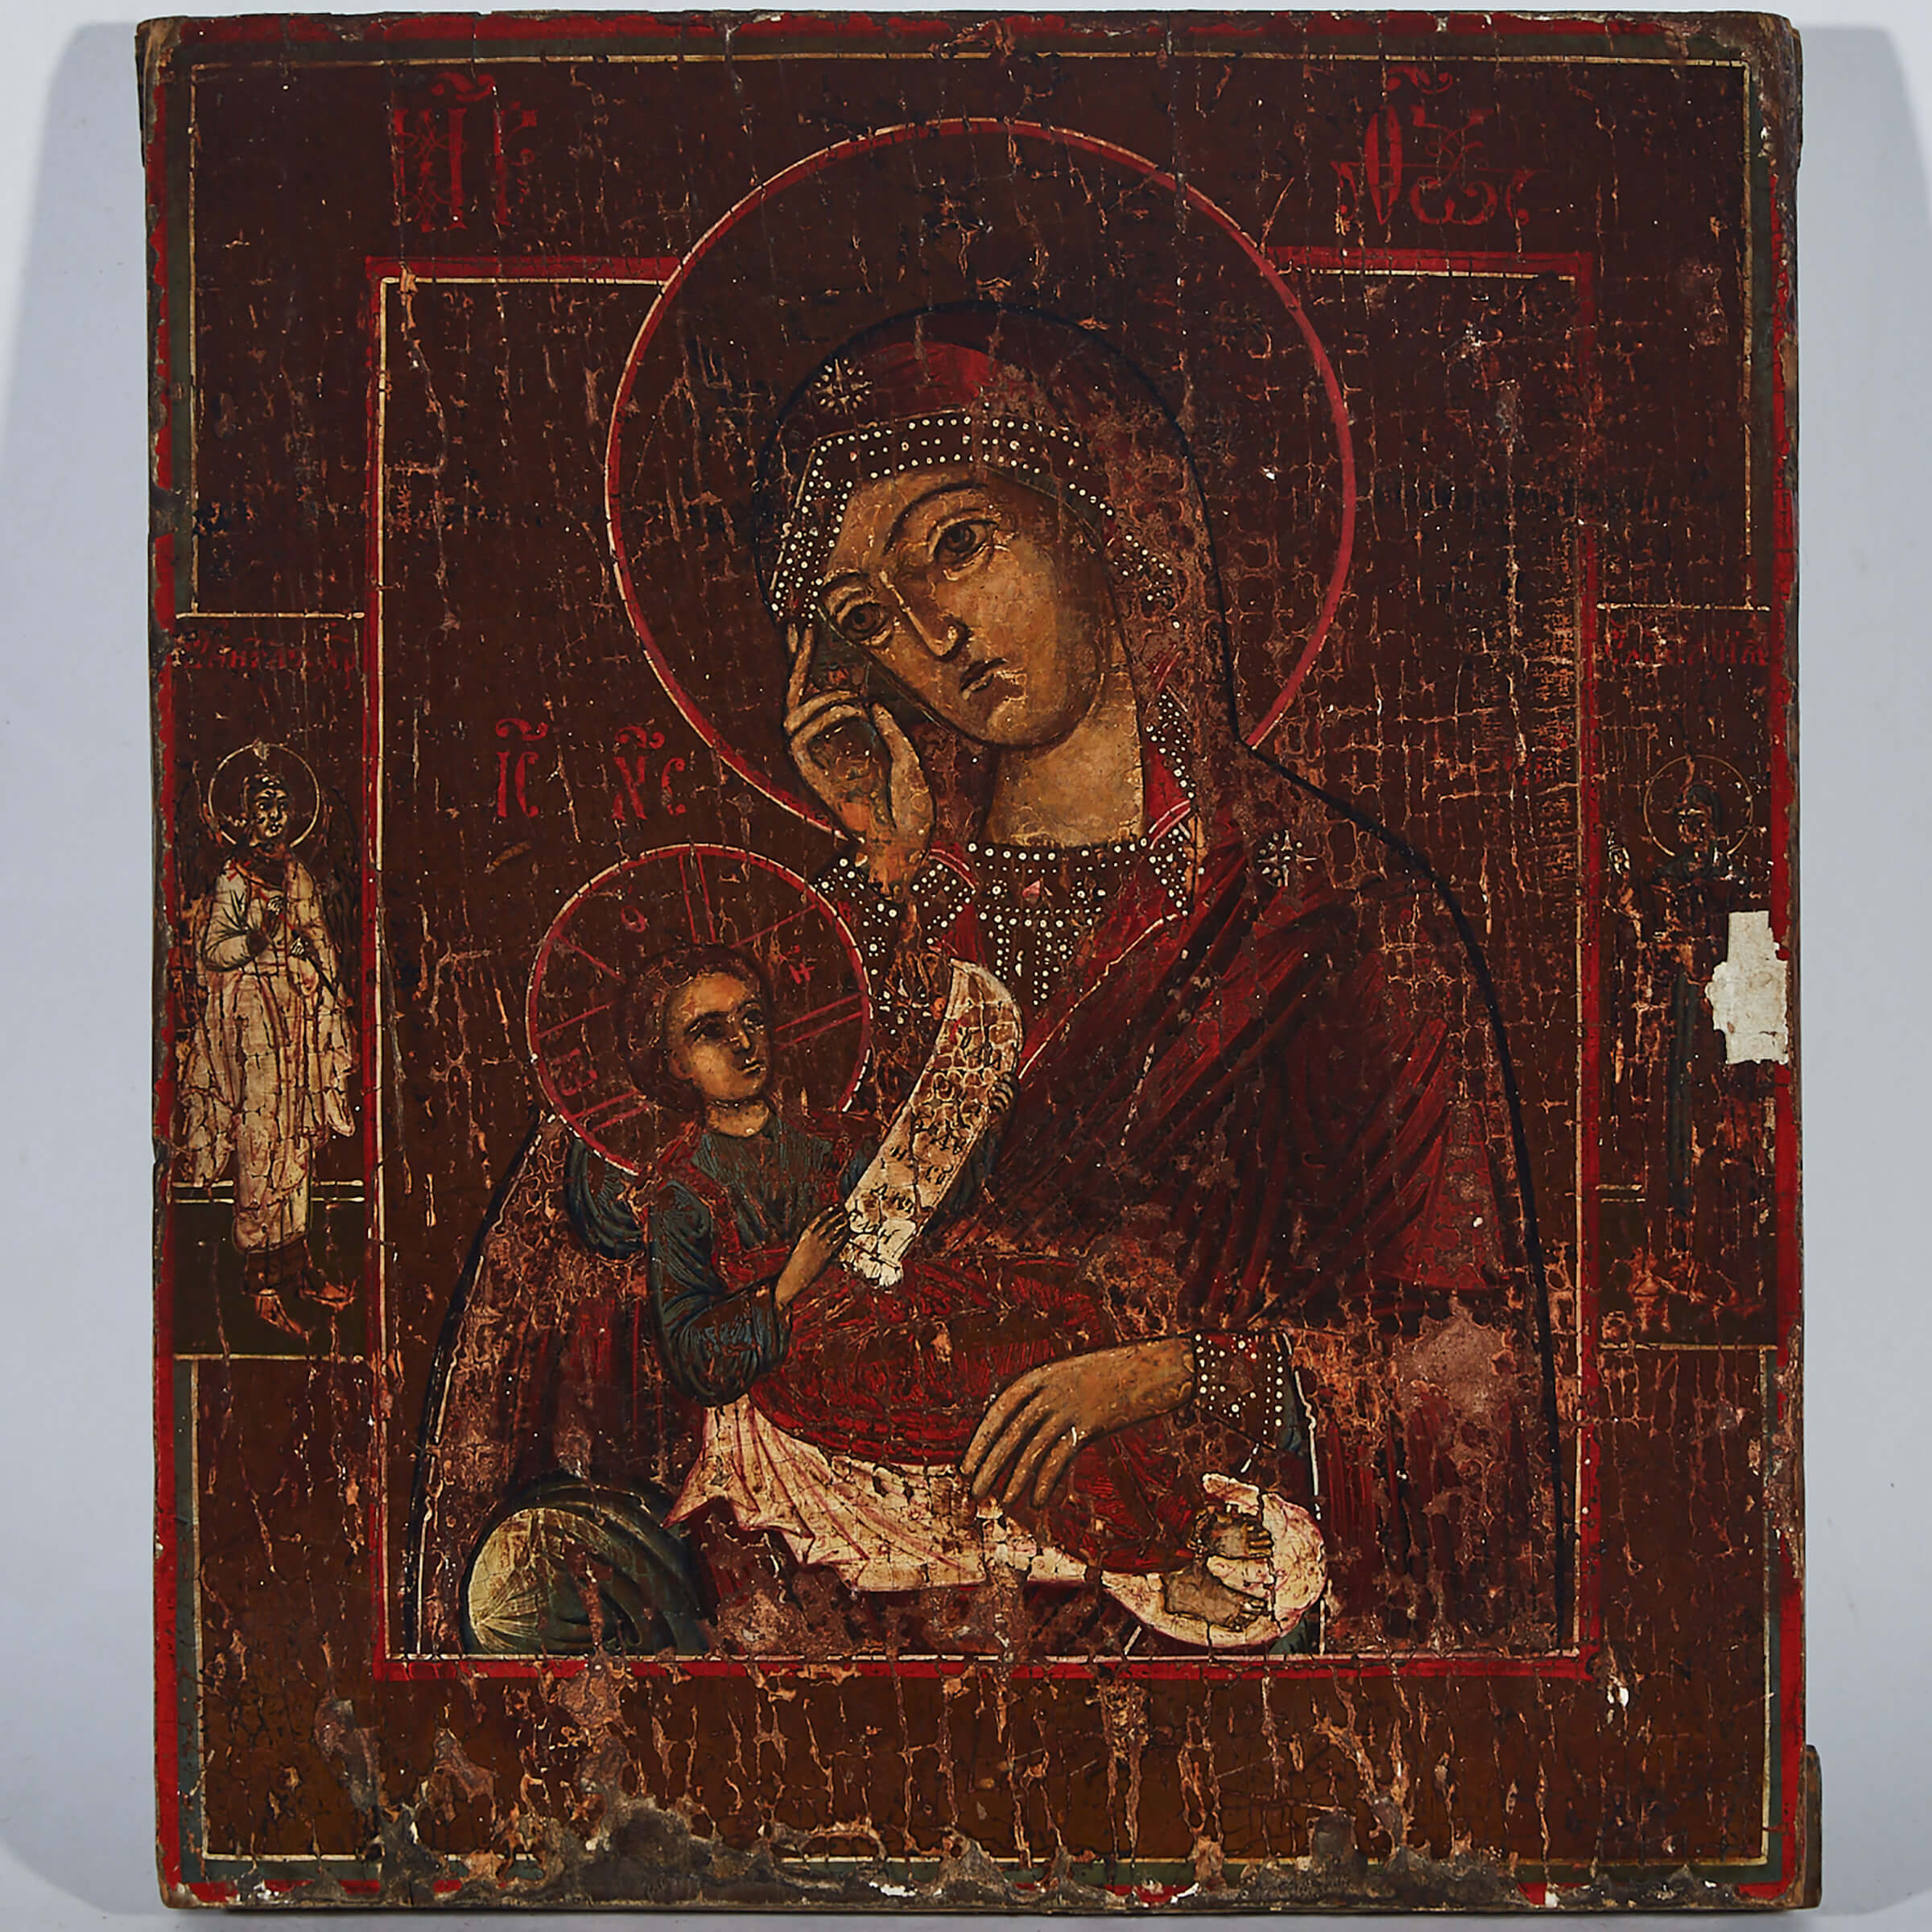 Russian ‘Soothe My Sorrows’ Marian Icon, 19th century